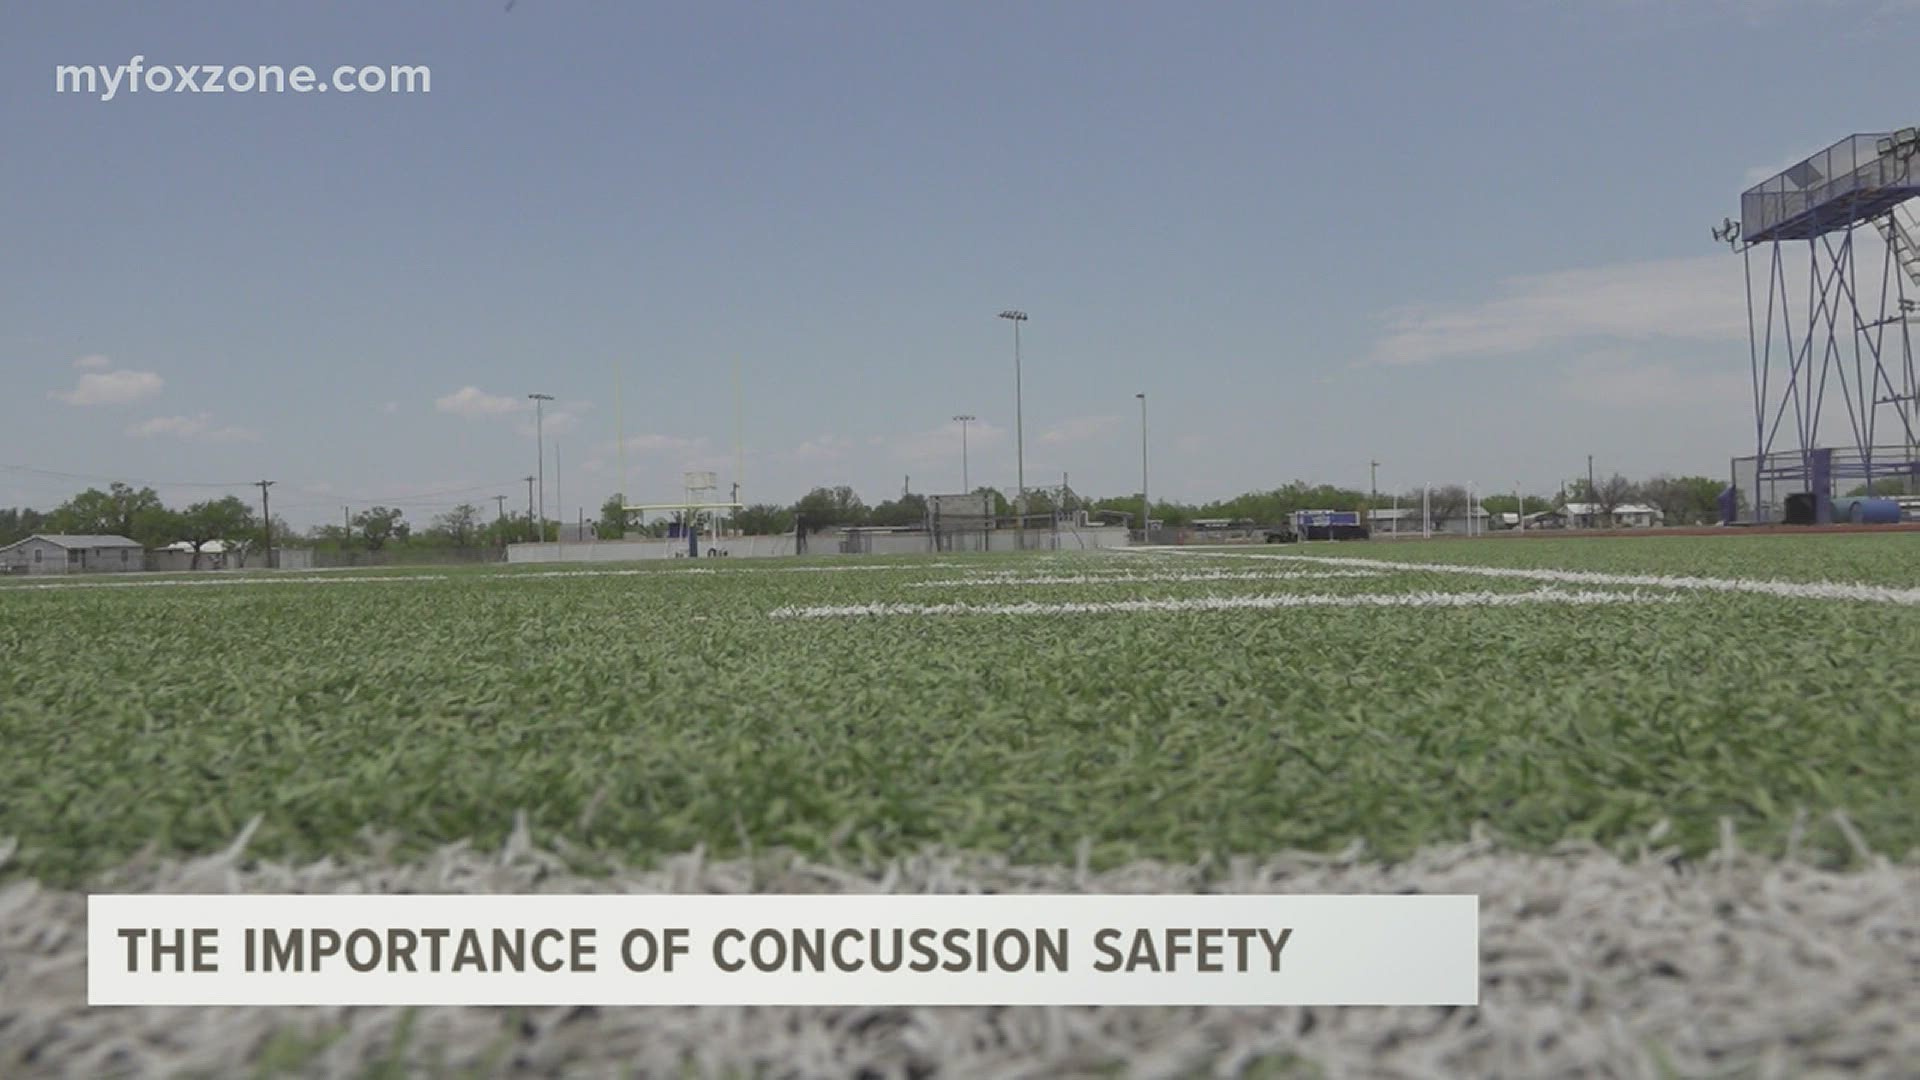 The importance of concussion safety